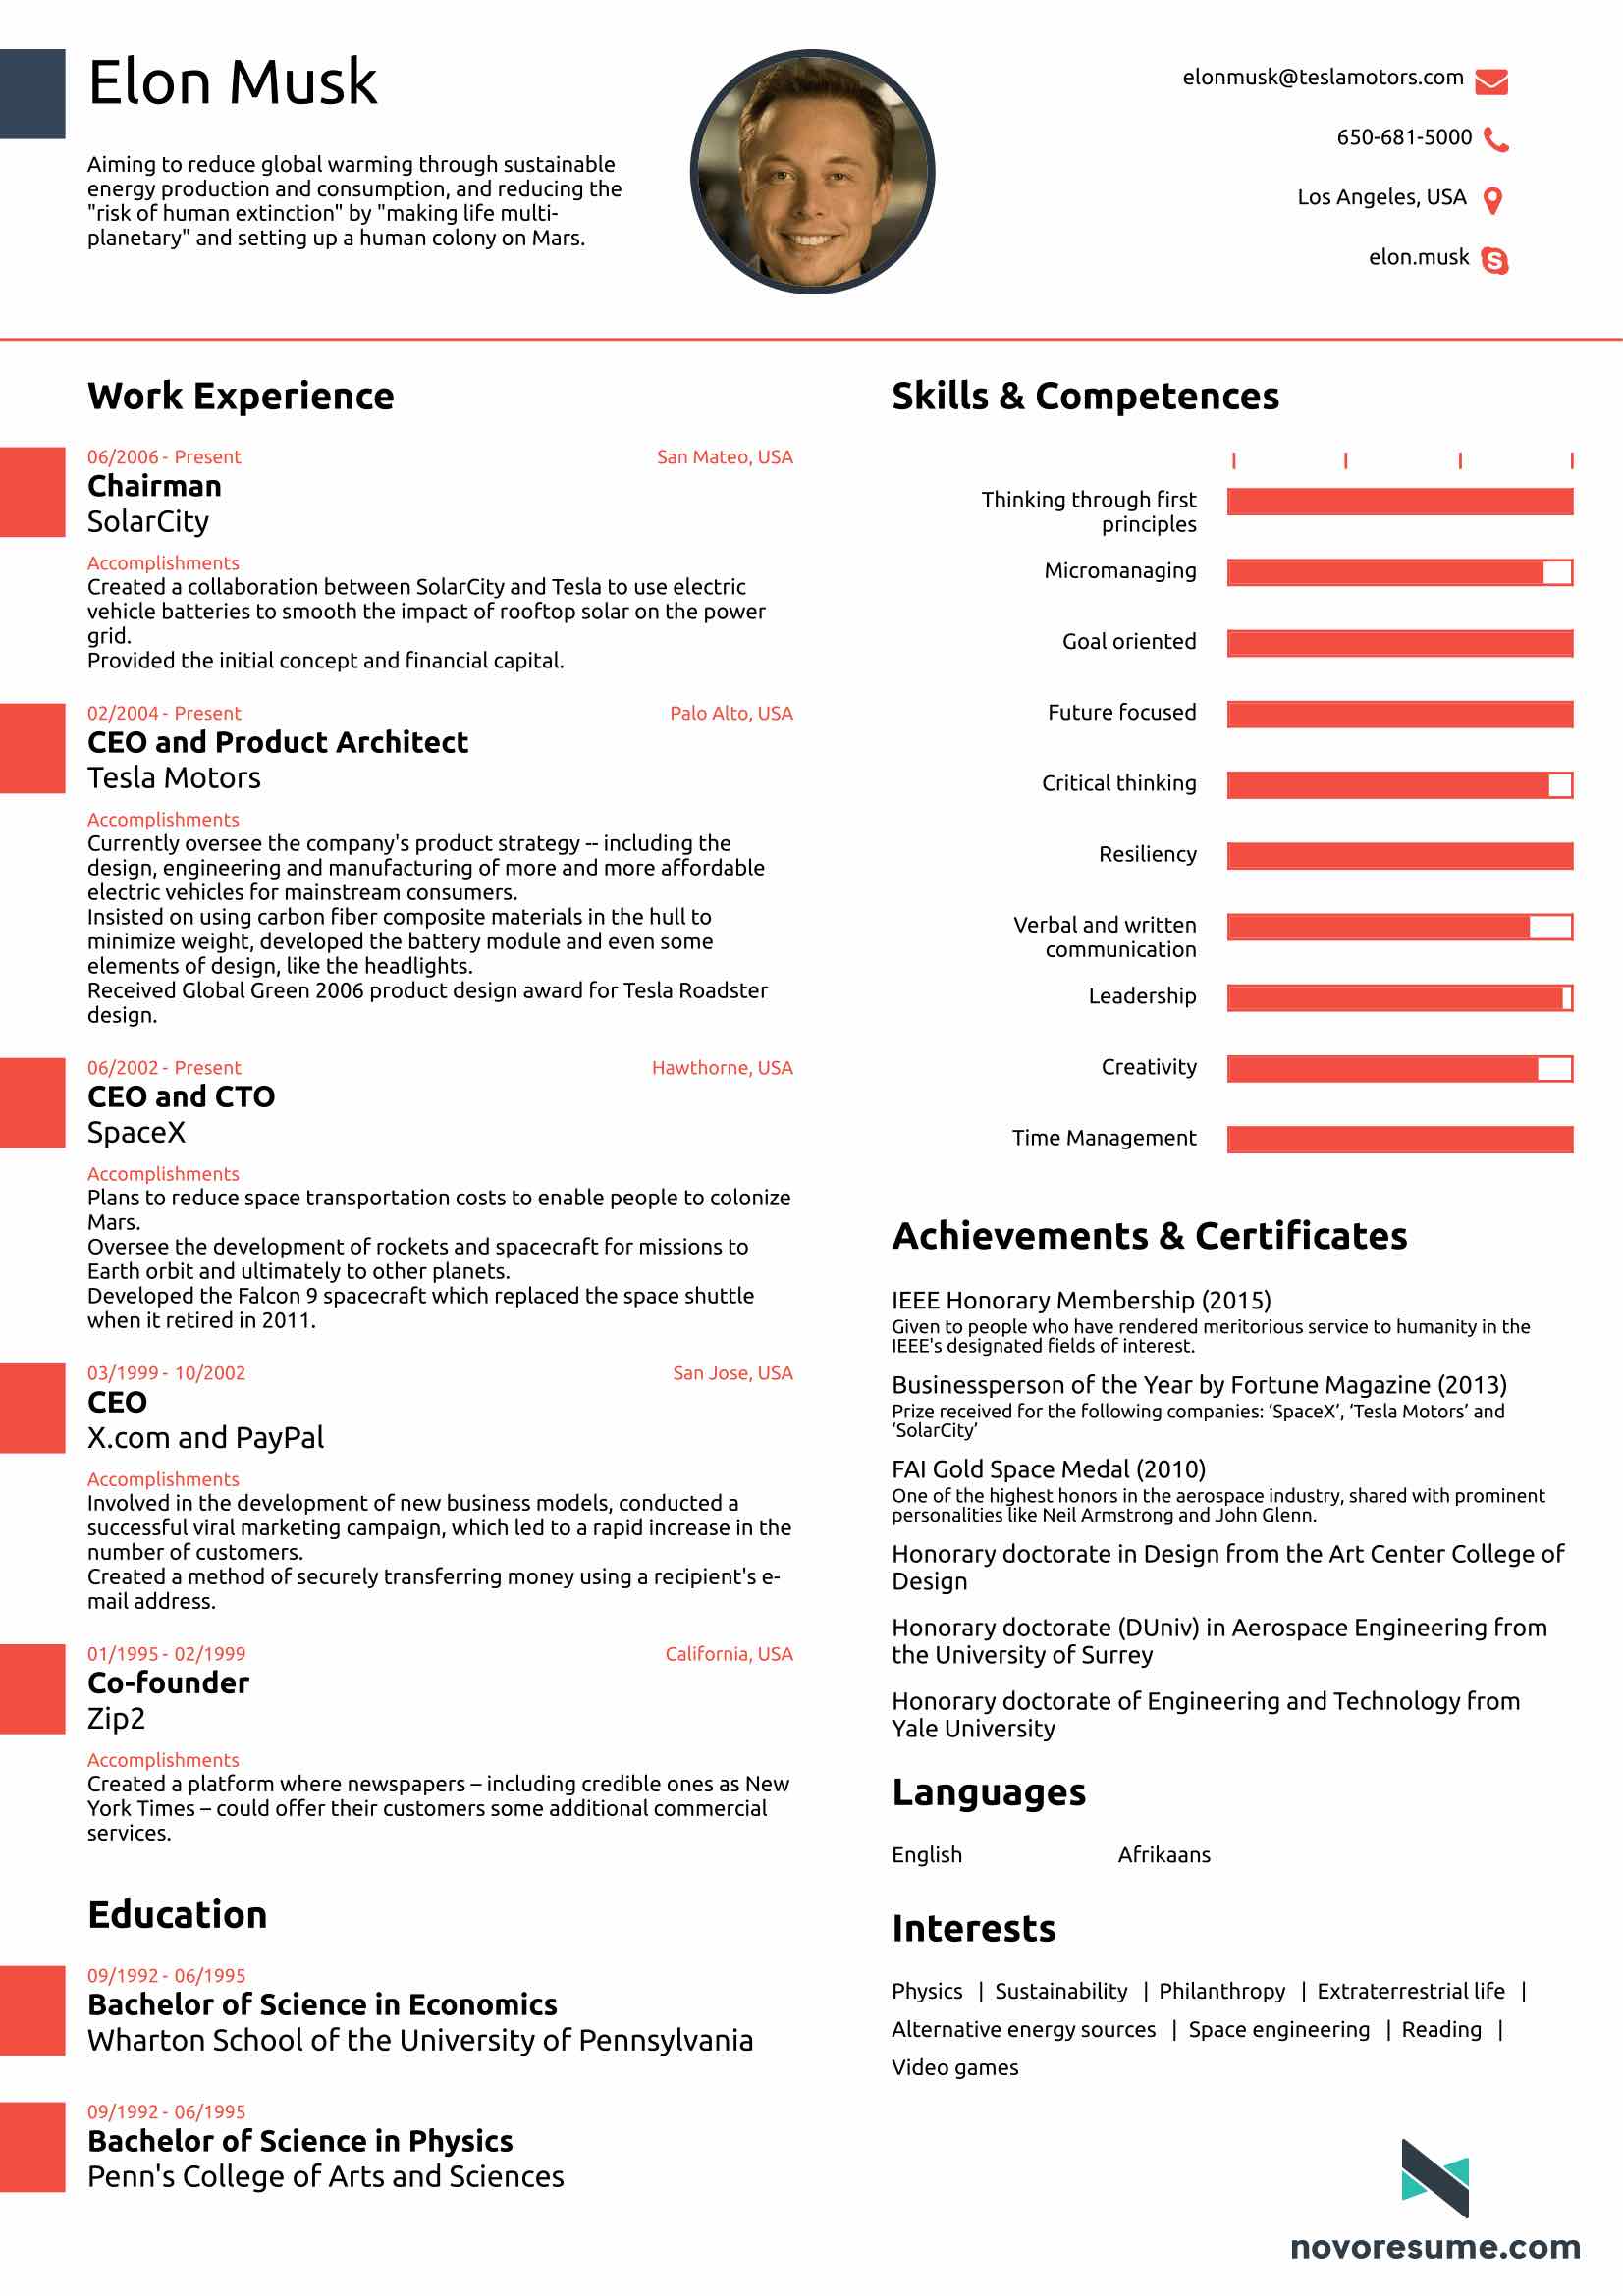 this resume for elon musk proves you never need to use